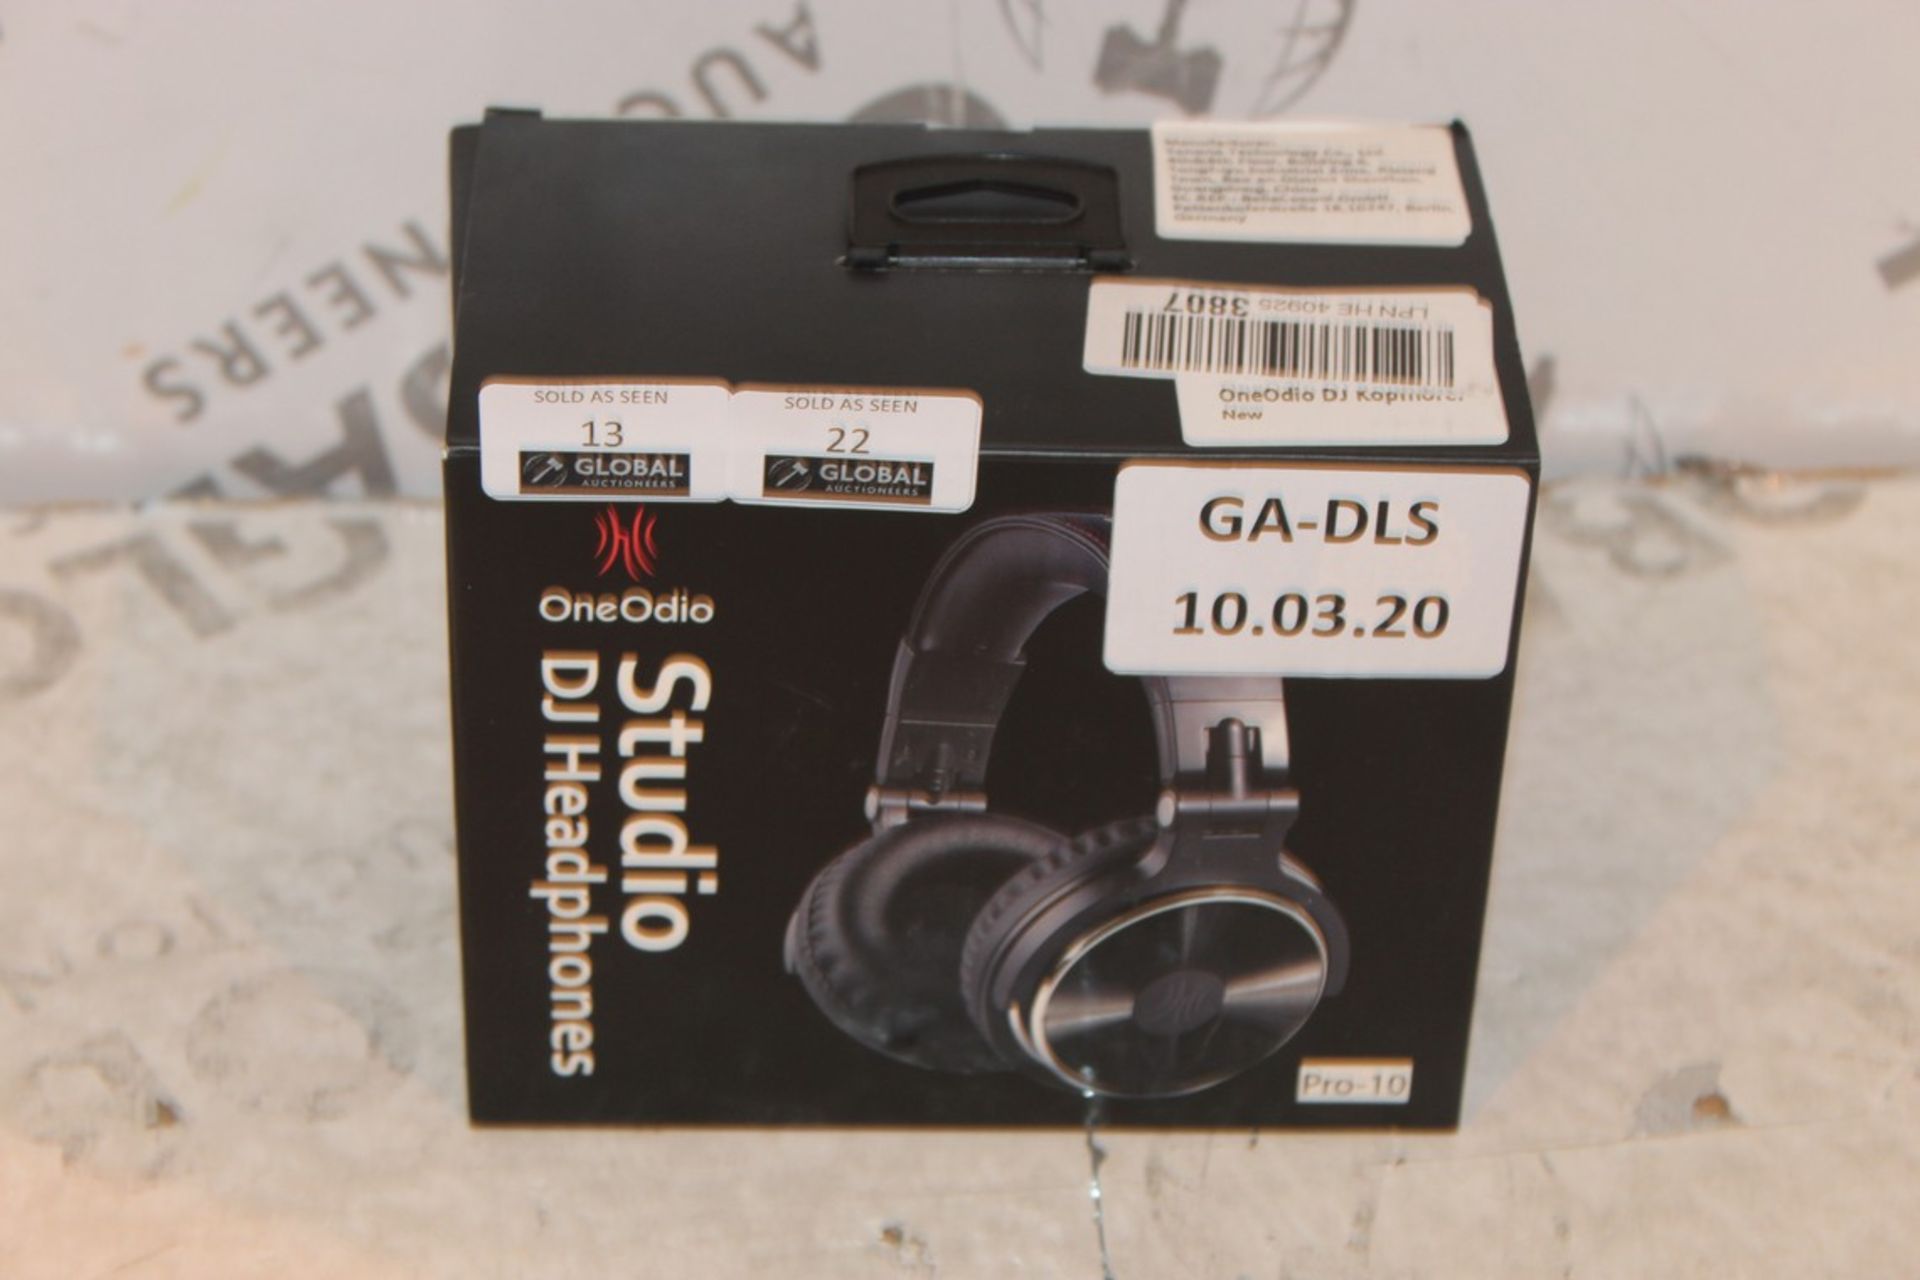 Boxed Brand New Pair One Odio Pro 10 Studio DJ Headphones RRP £55 (Appraisals Available Upon